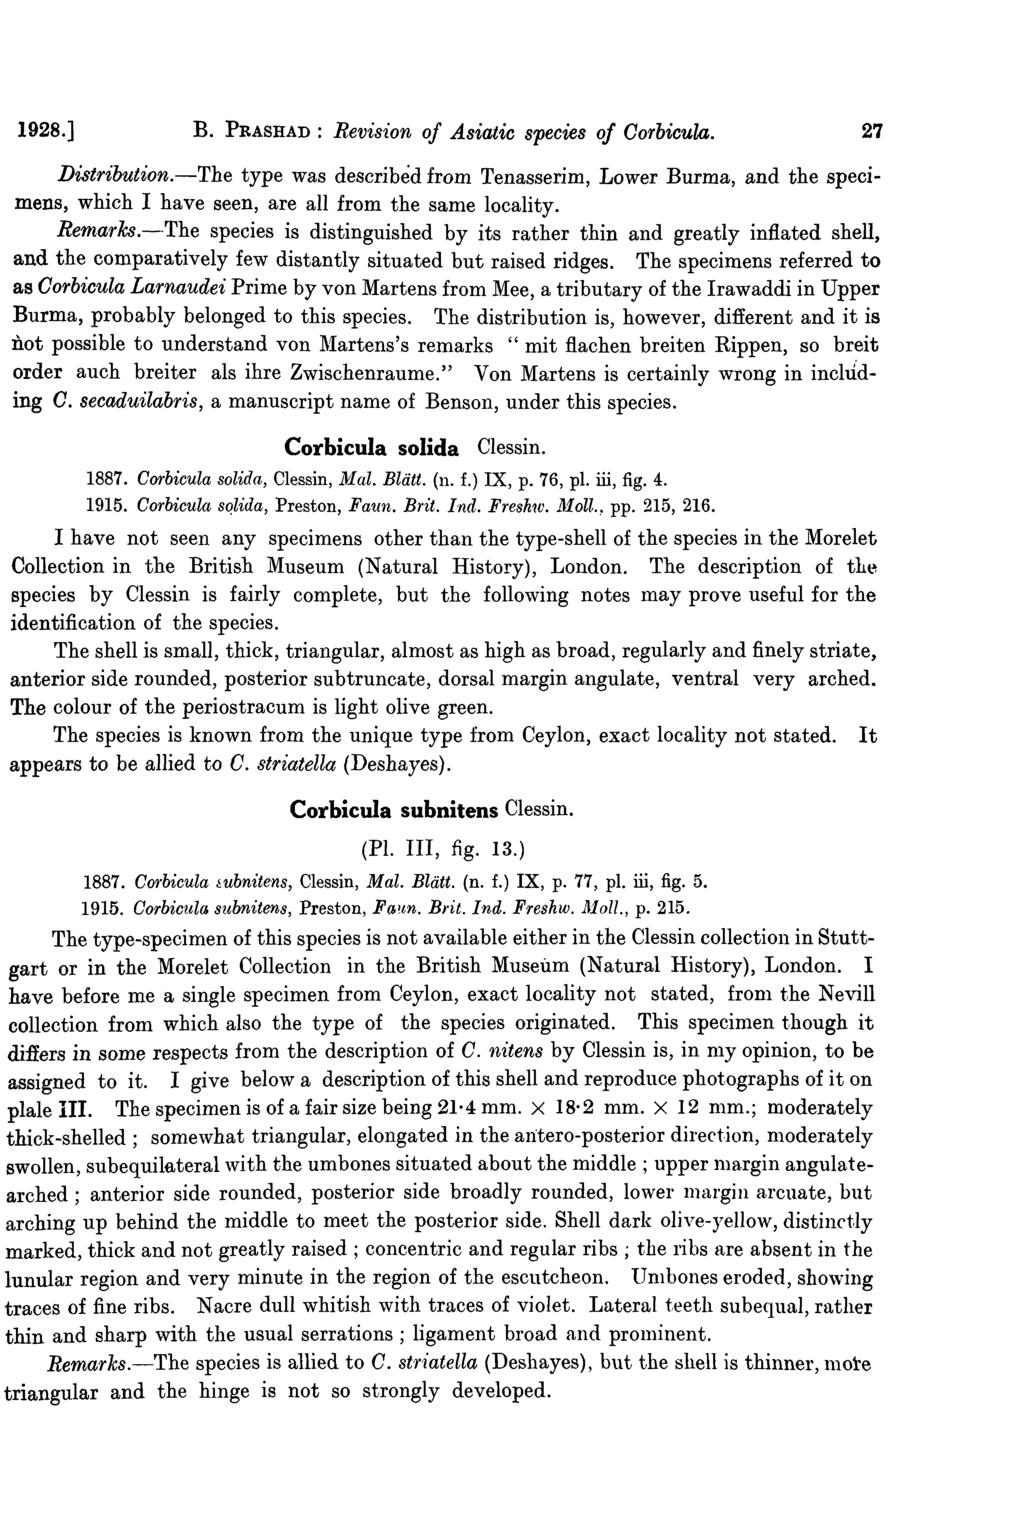 1928.] B. PRASHAD: Revision of Asiatic species of Oorbicula. 27 Distribution.-The type was described from Tenasserim, Lower Burma, and the specimens, which I have seen, are all from the same locality.